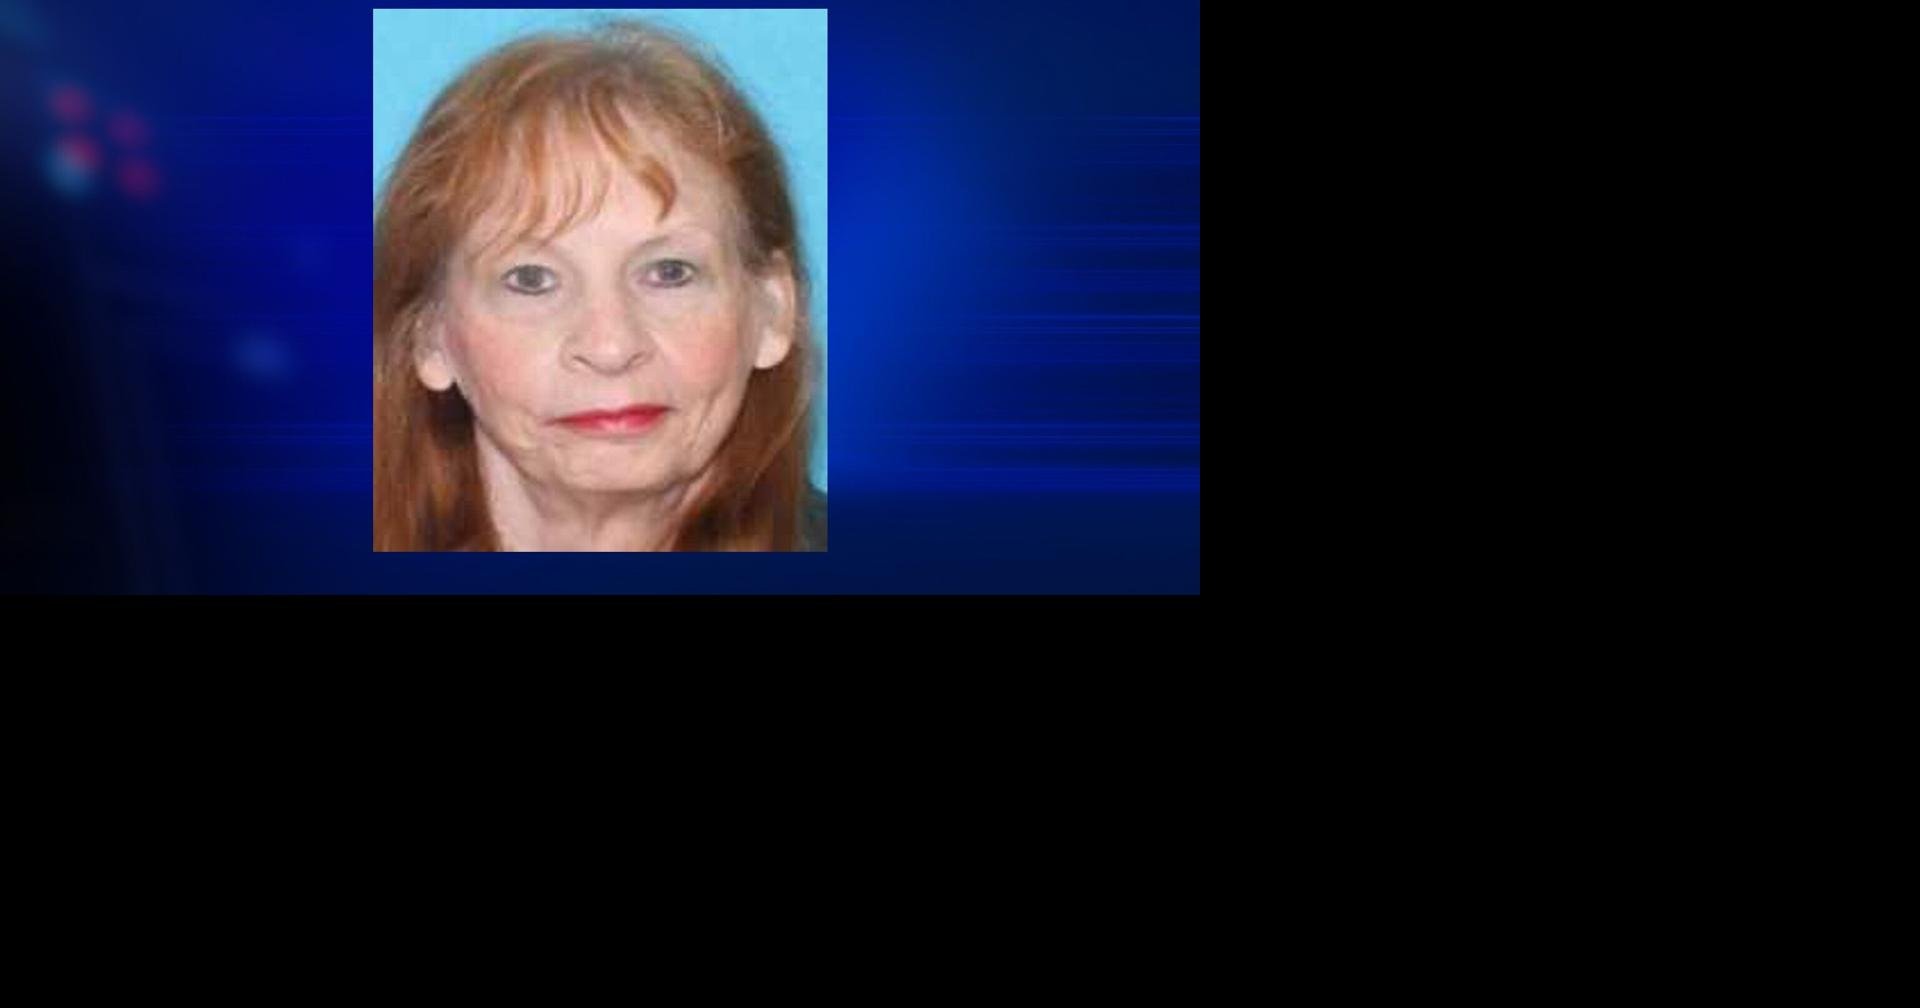 Missoula Police Searching For Missing Woman Last Seen In Butte Montana News